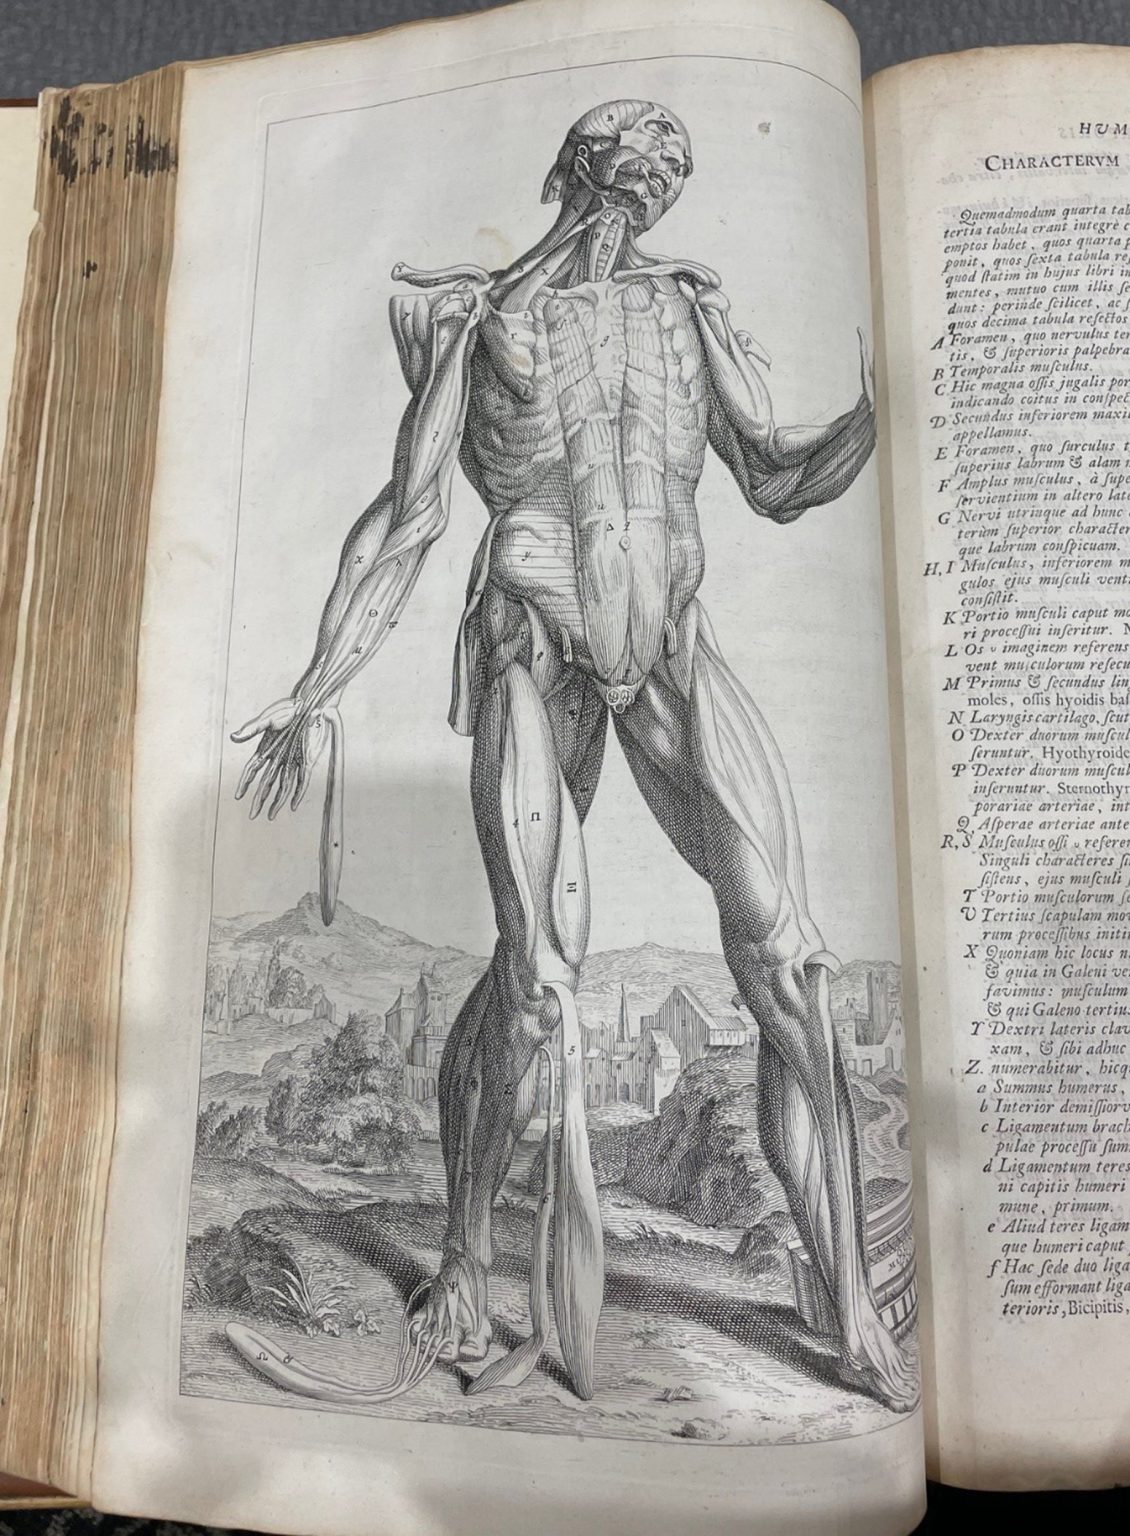 PRIMARY QS 17 V575 v.1 1725, Andreas Vesalius, Opera omnia anatomica…, vol. 1, printed book with woodcuts, 1725, opening: image and text page entitled “Characterum Quintae Musculorum Tabulae, Index.” Health Sciences Library.